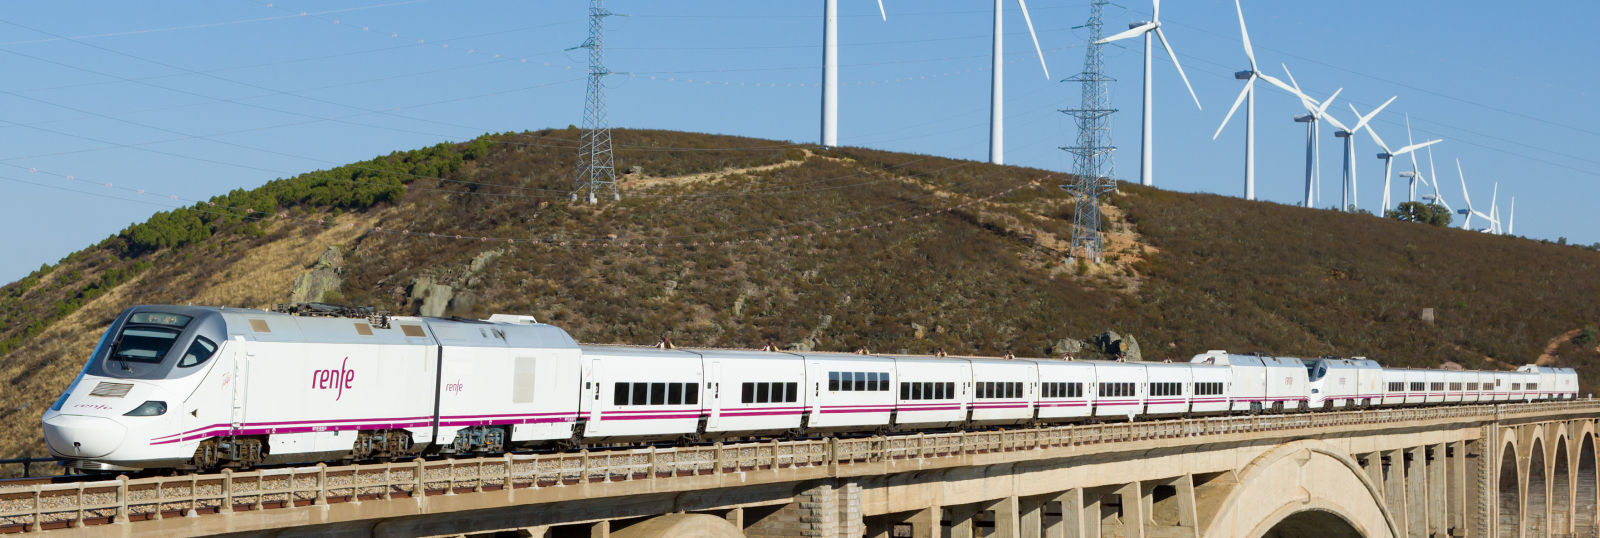 Two trains in multiple working in October 2012 on the Viaducto Martin Gil near Zamora